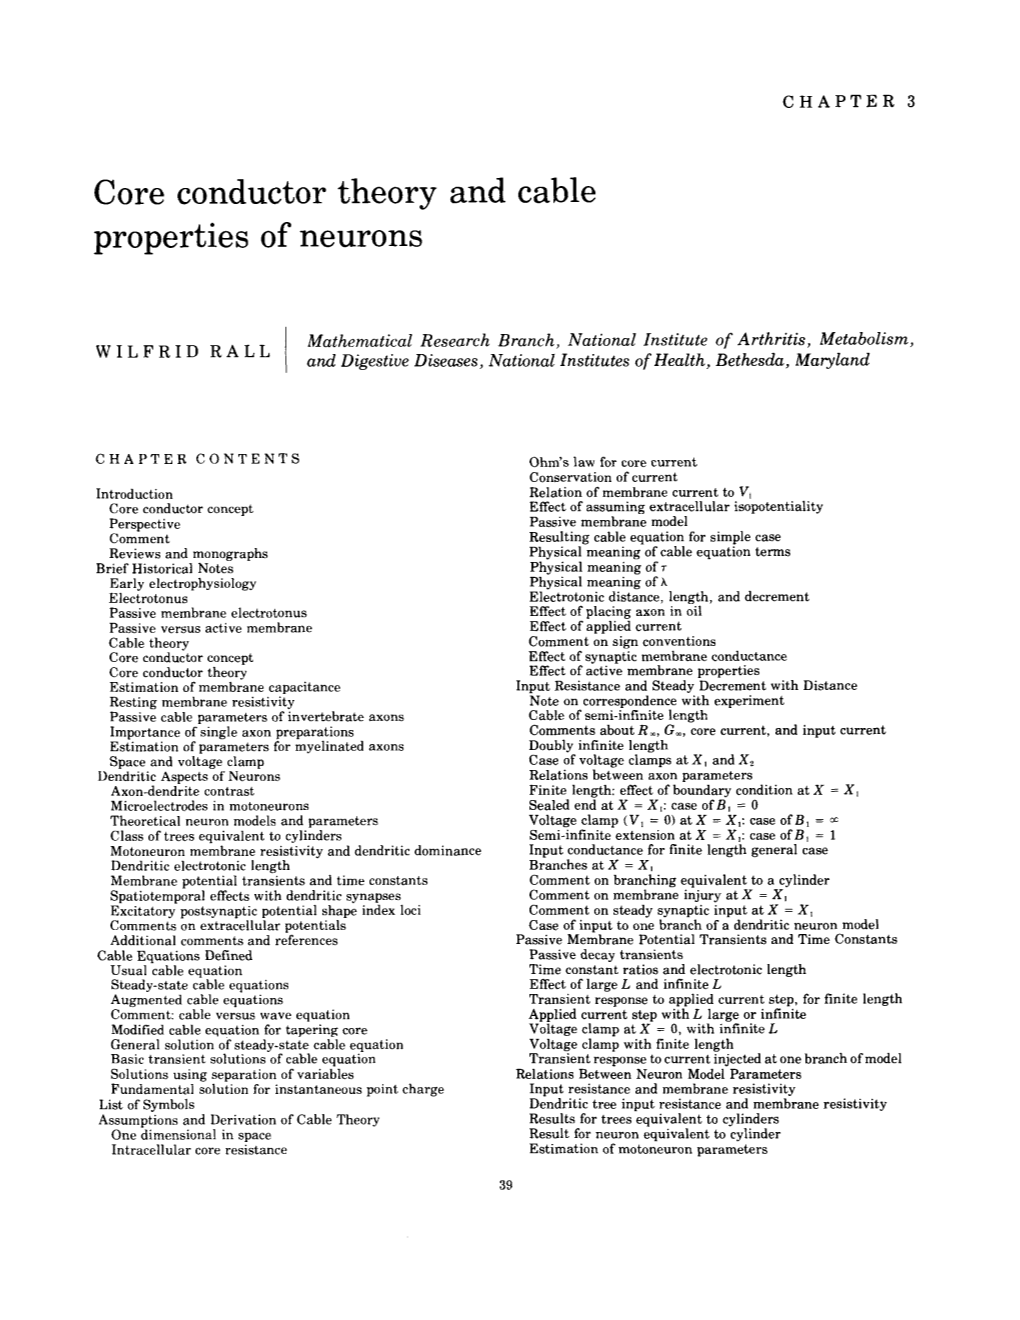 Core Conductor Theory and Cable Properties of Neurons. In